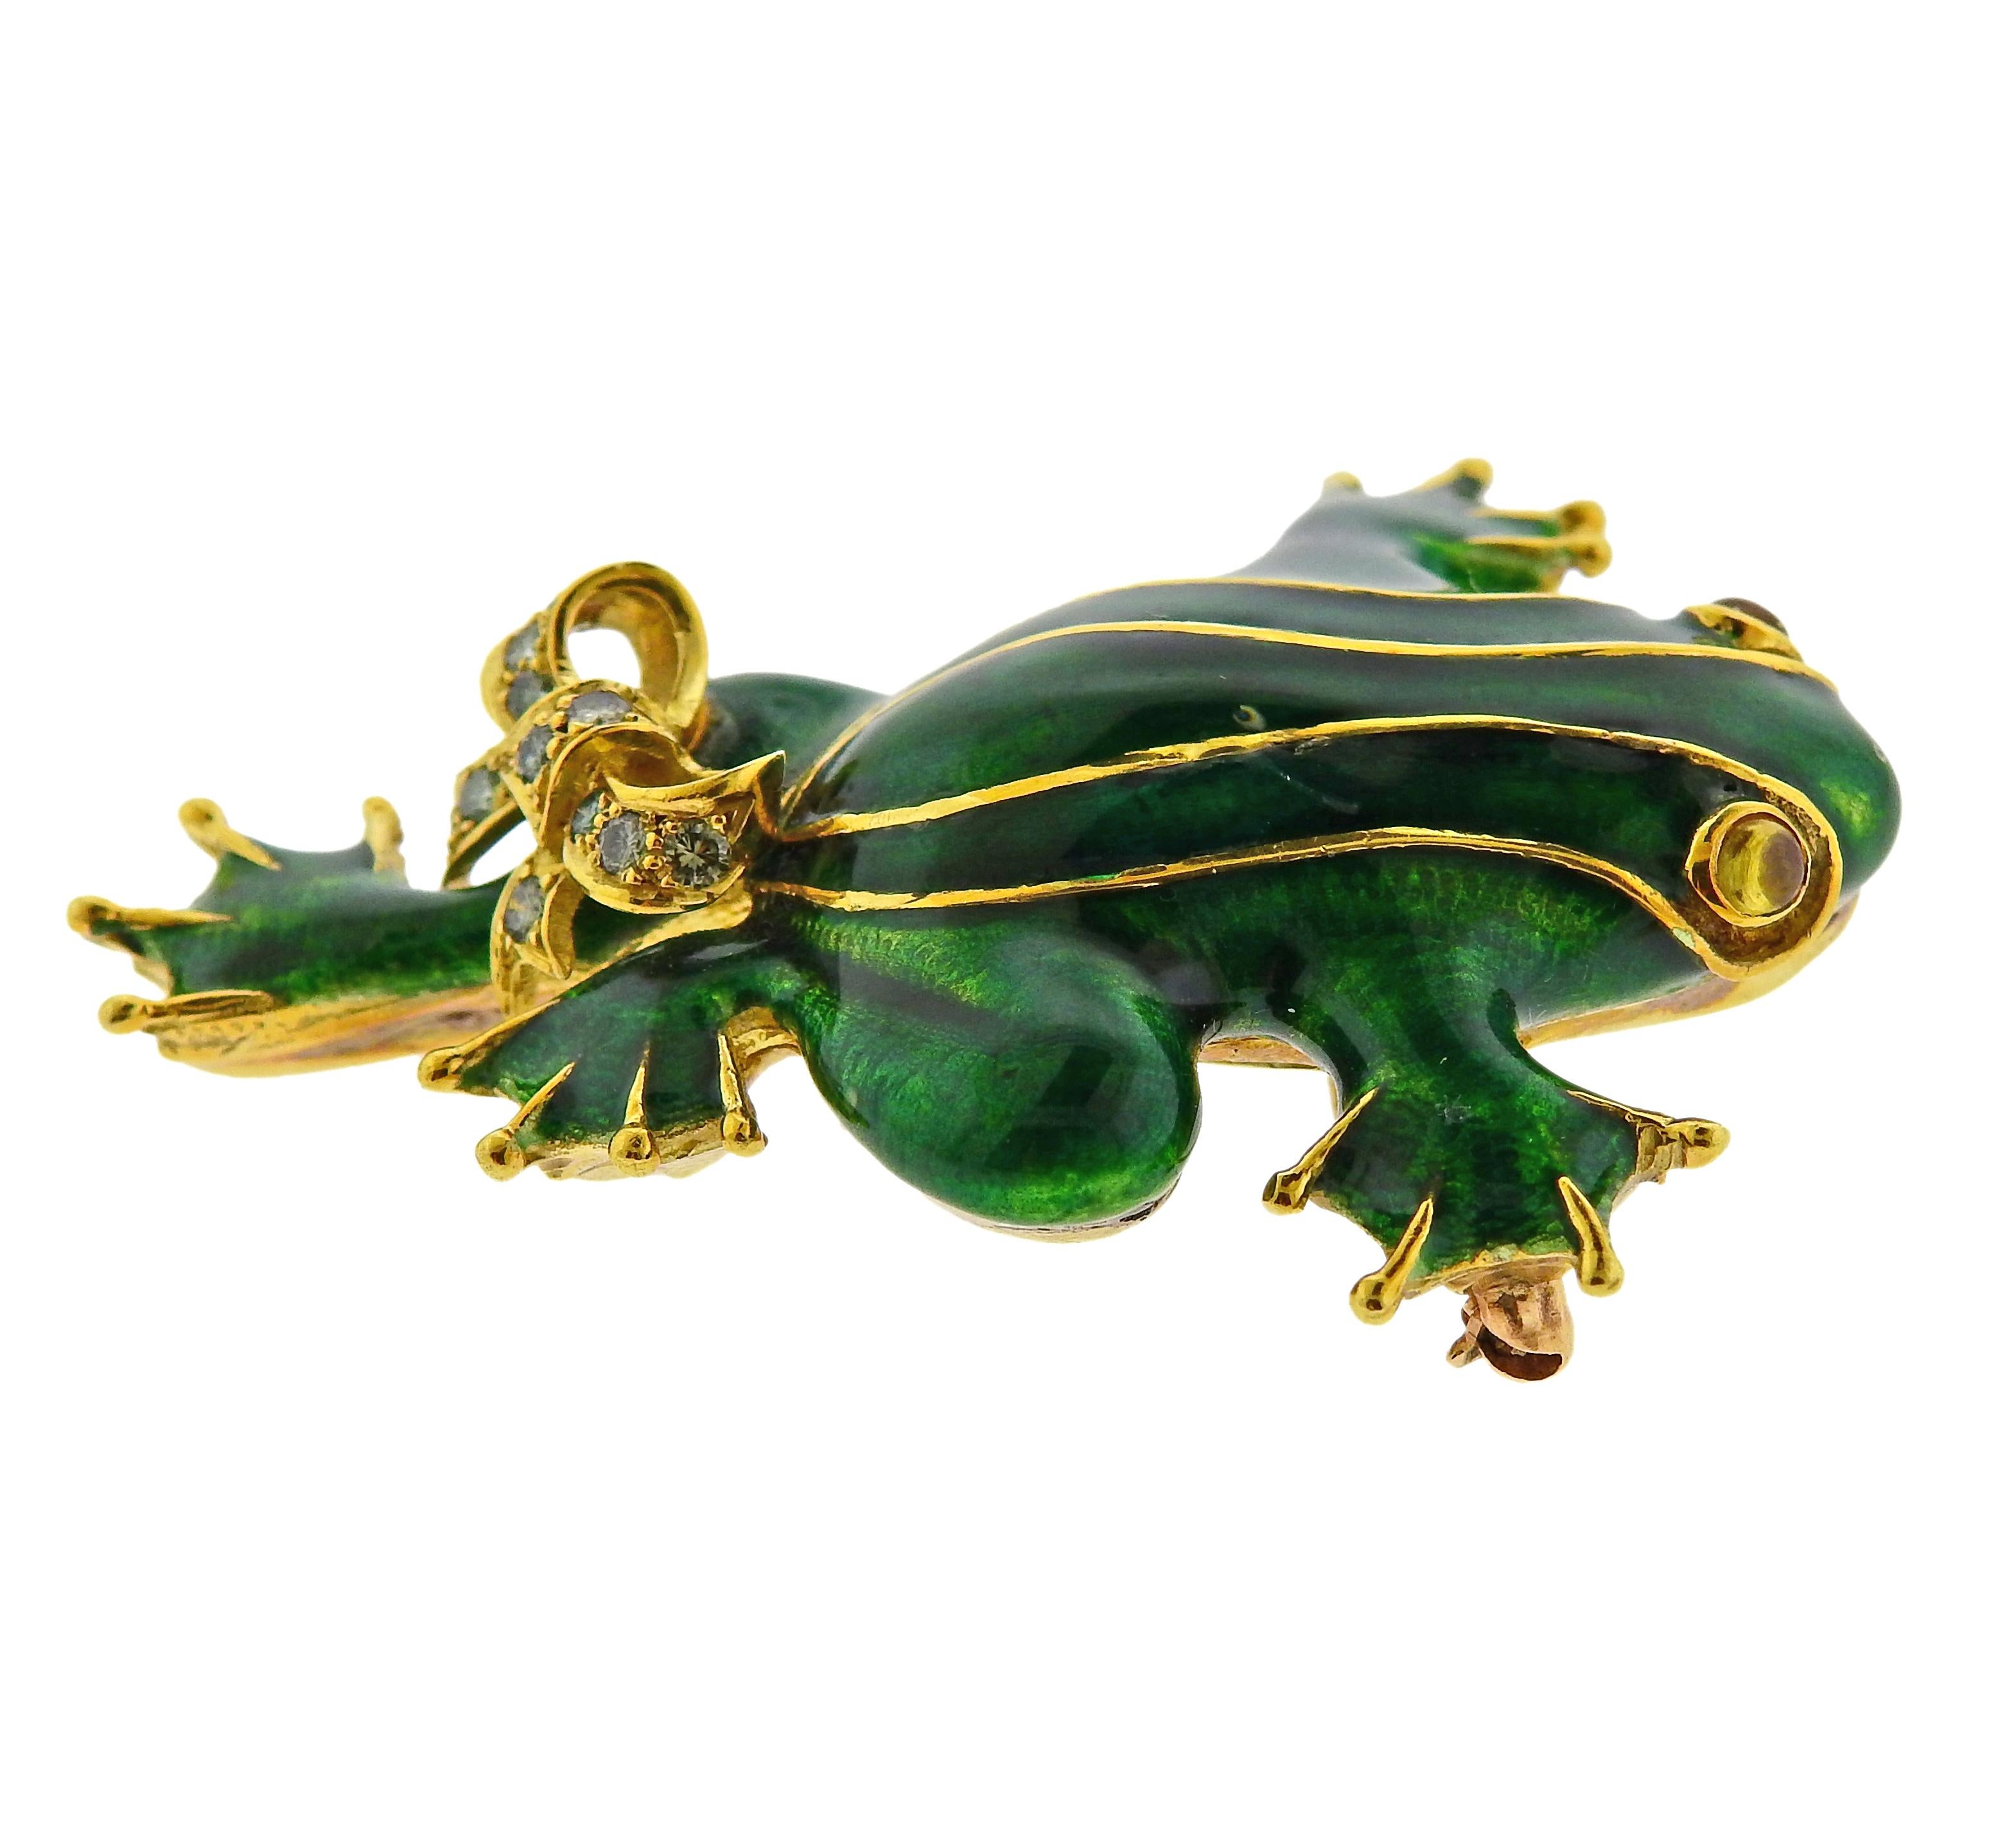 18k yellow gold and enamel frog brooch, adorned with a bow, set with approx. 0.20ctw in fancy bluish/teal diamonds. Brooch is 53mm x 40mm. Marked 18k. Weighs 31.2 grams.

SKU#PB-02357